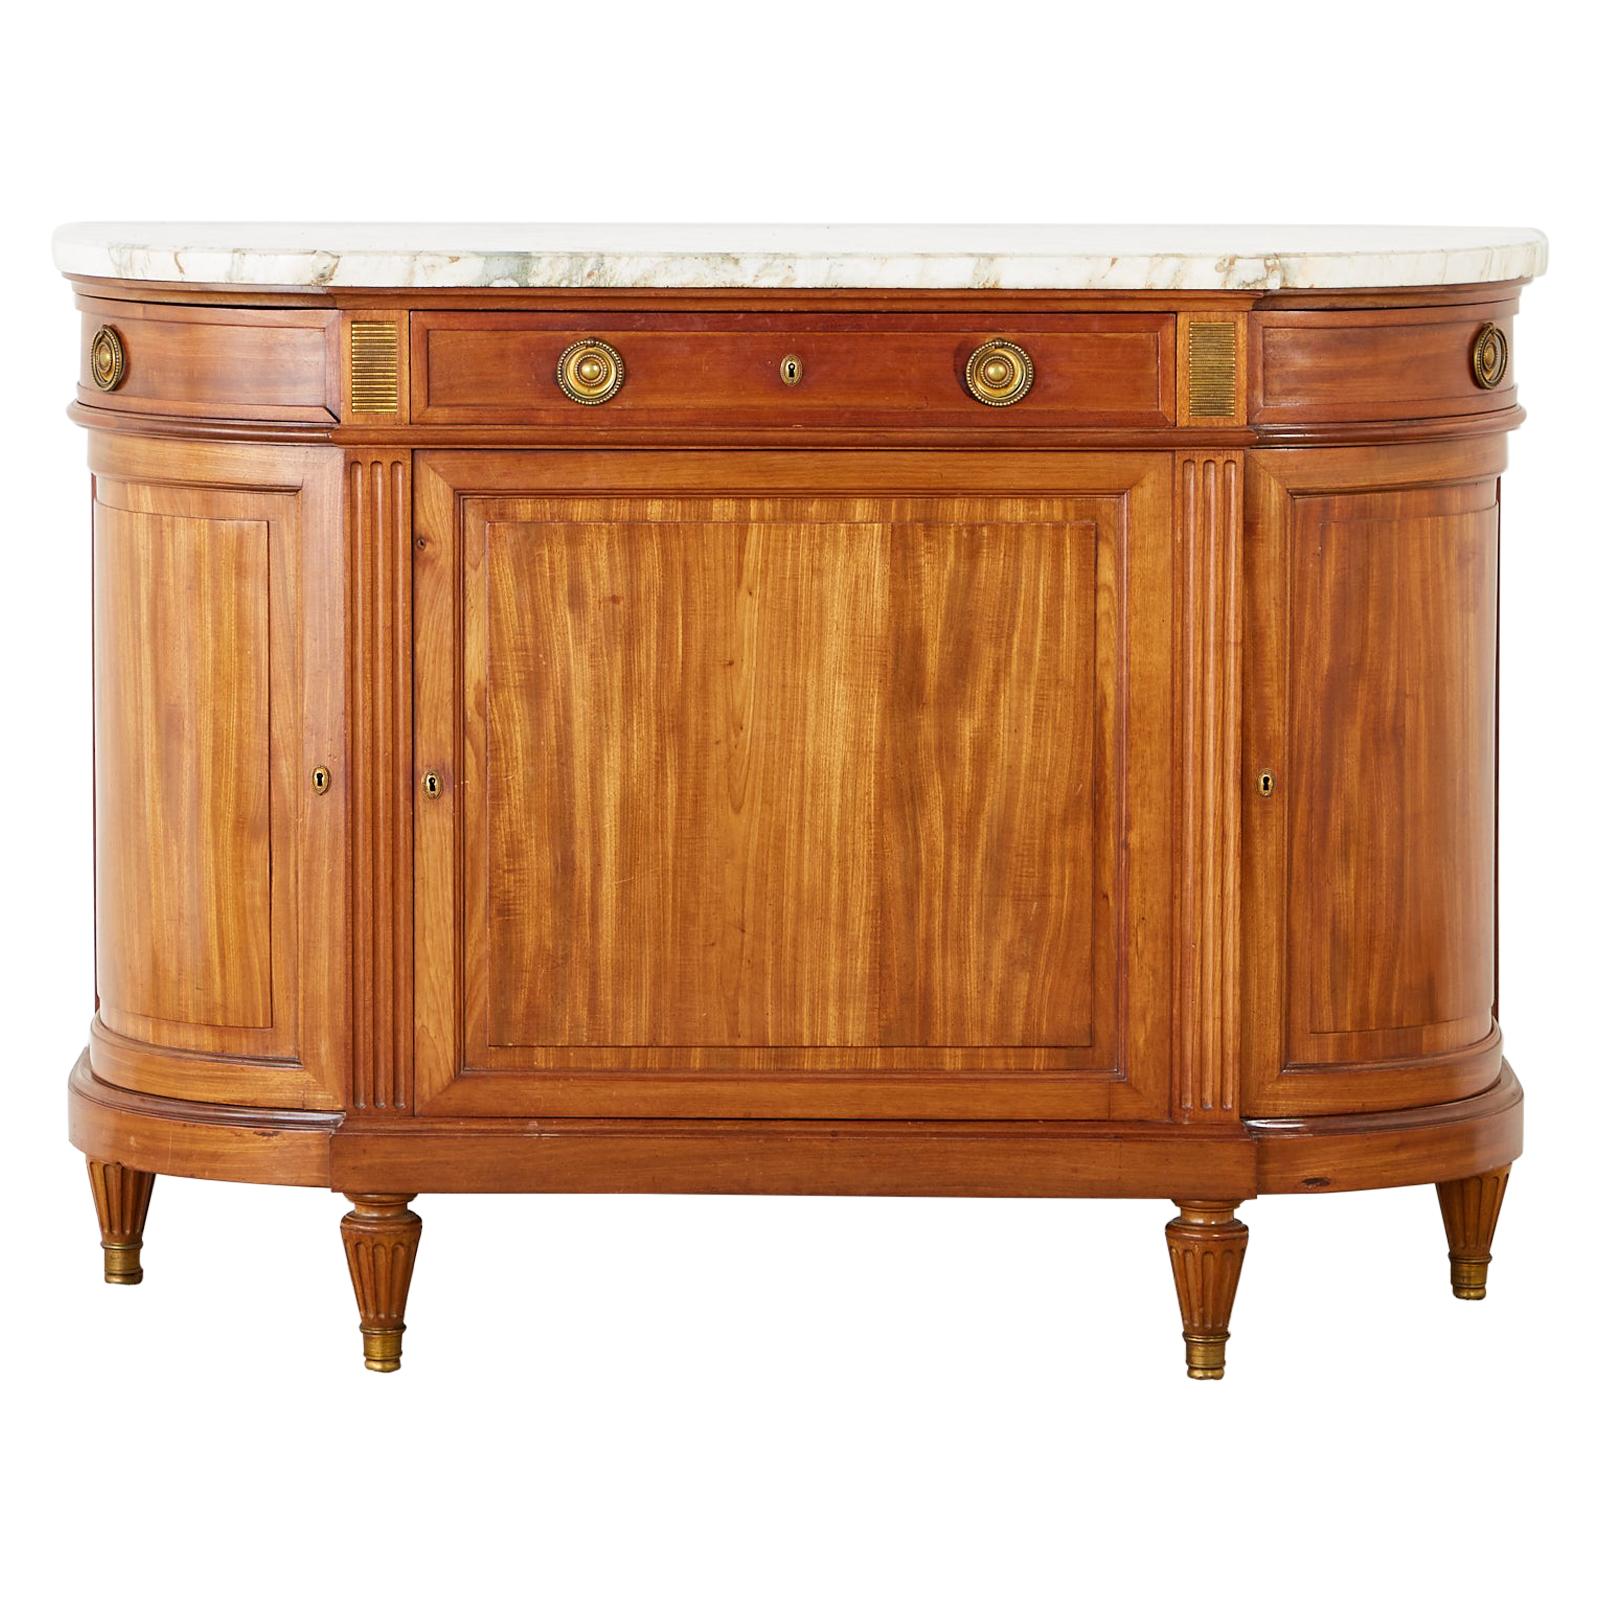 French Louis XVI Style Mahogany Marble-Top Sideboard Server